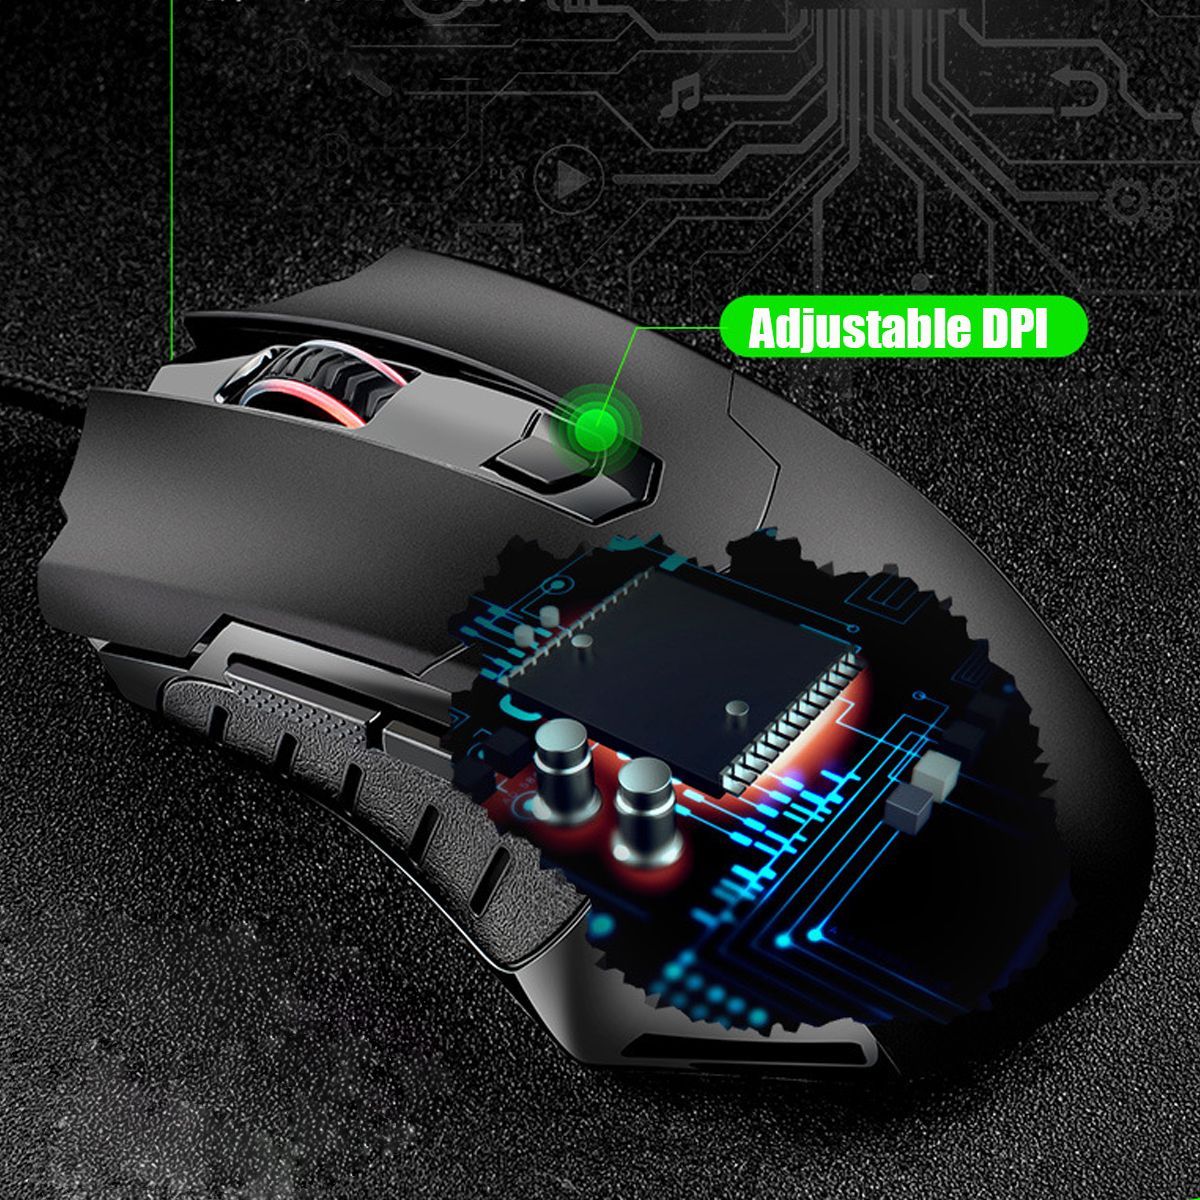 RGB-Backlight-Gaming-Mouse-2400DPI-Adjustable-7-Buttons-USB-Wired-Mice-Optical-Mouse-1290878